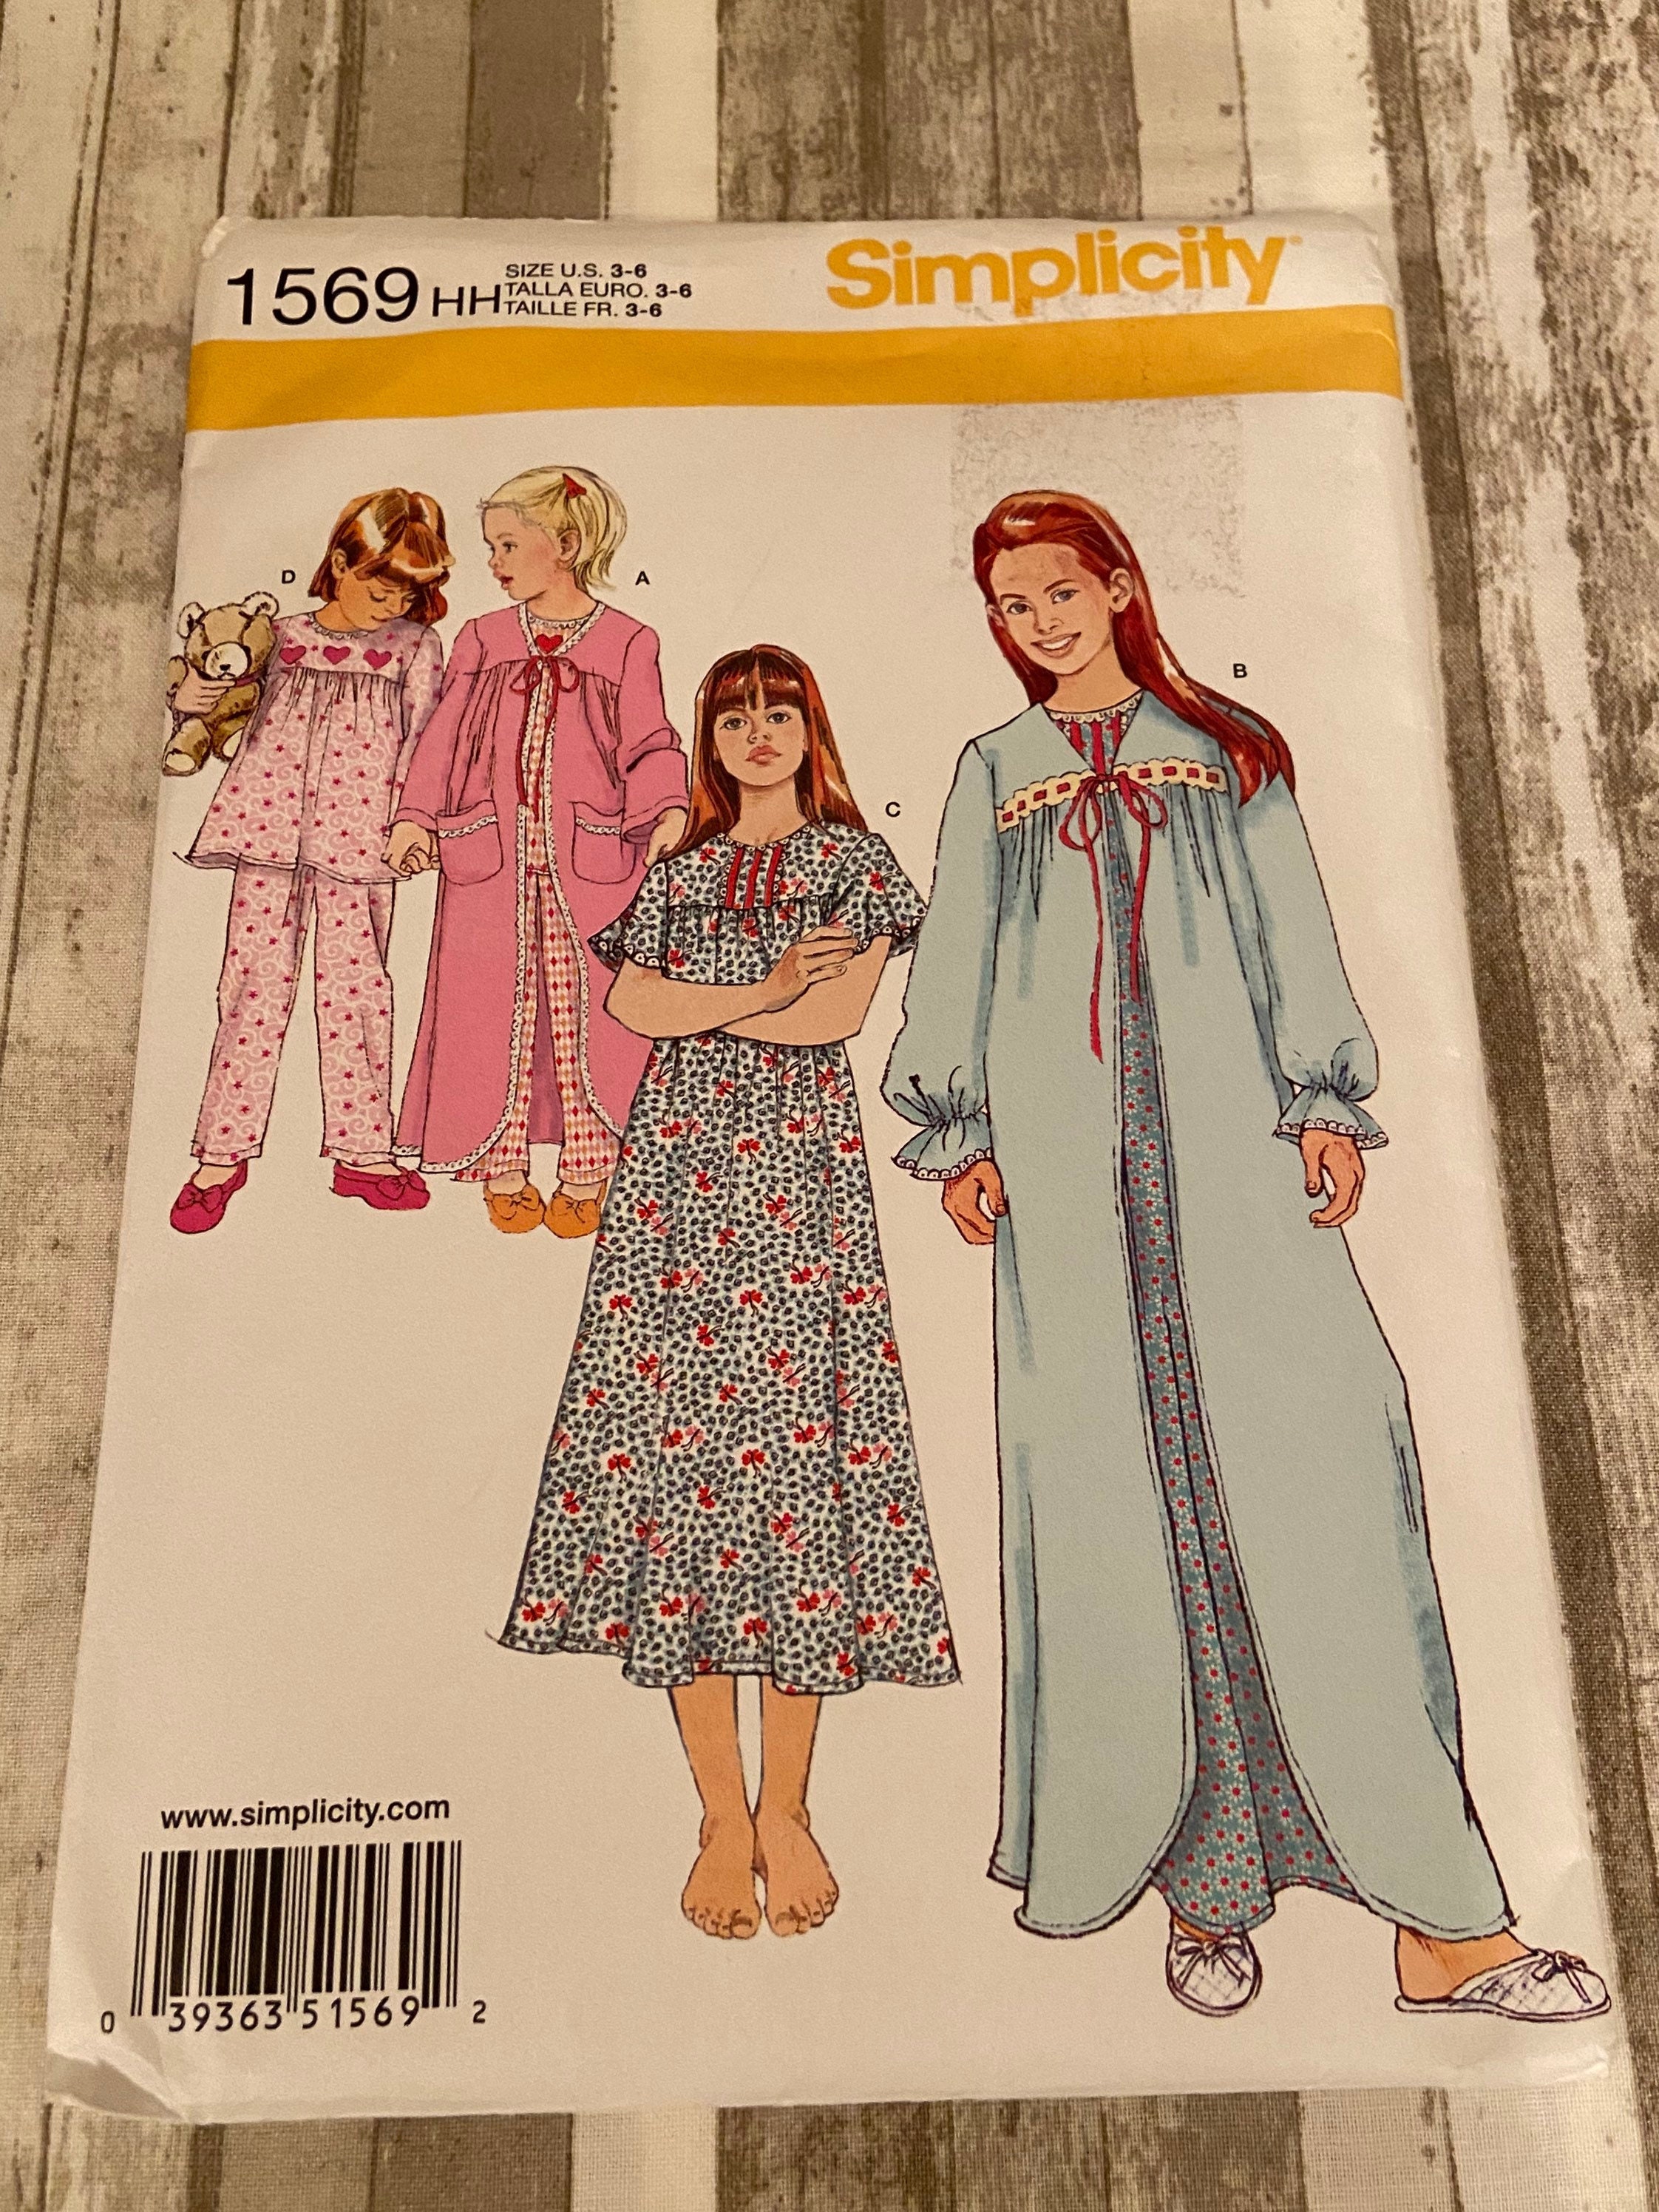 White, Size HH Paper Simplicity Sewing Pattern 1569: Childs and Girls Sleepwear 3-4-5-6